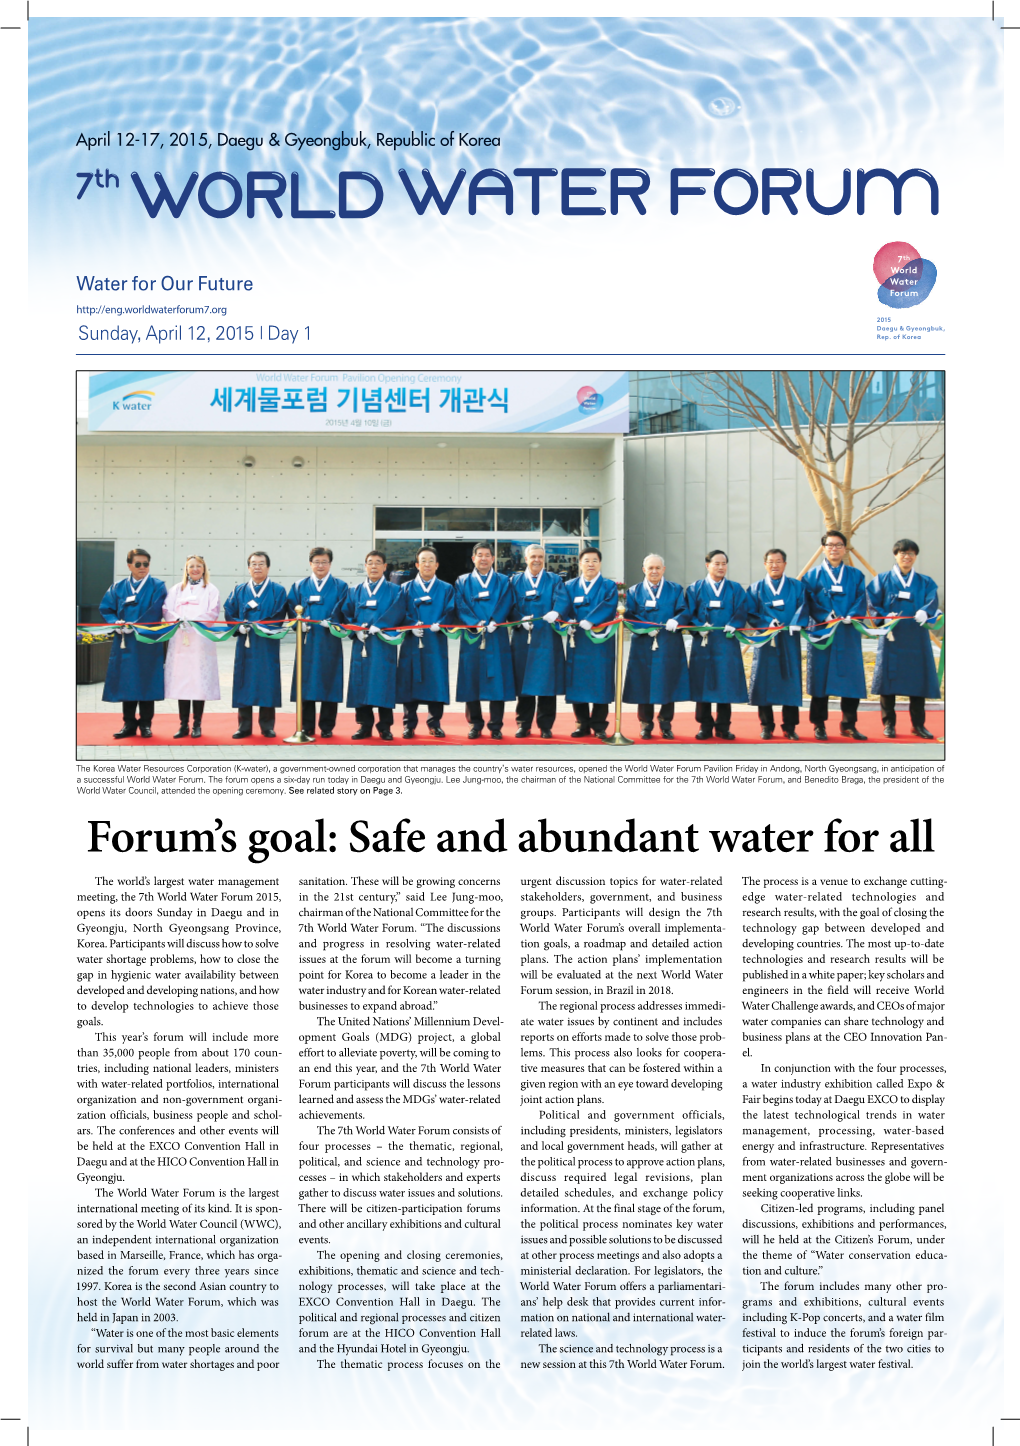 Forum's Goal: Safe and Abundant Water For